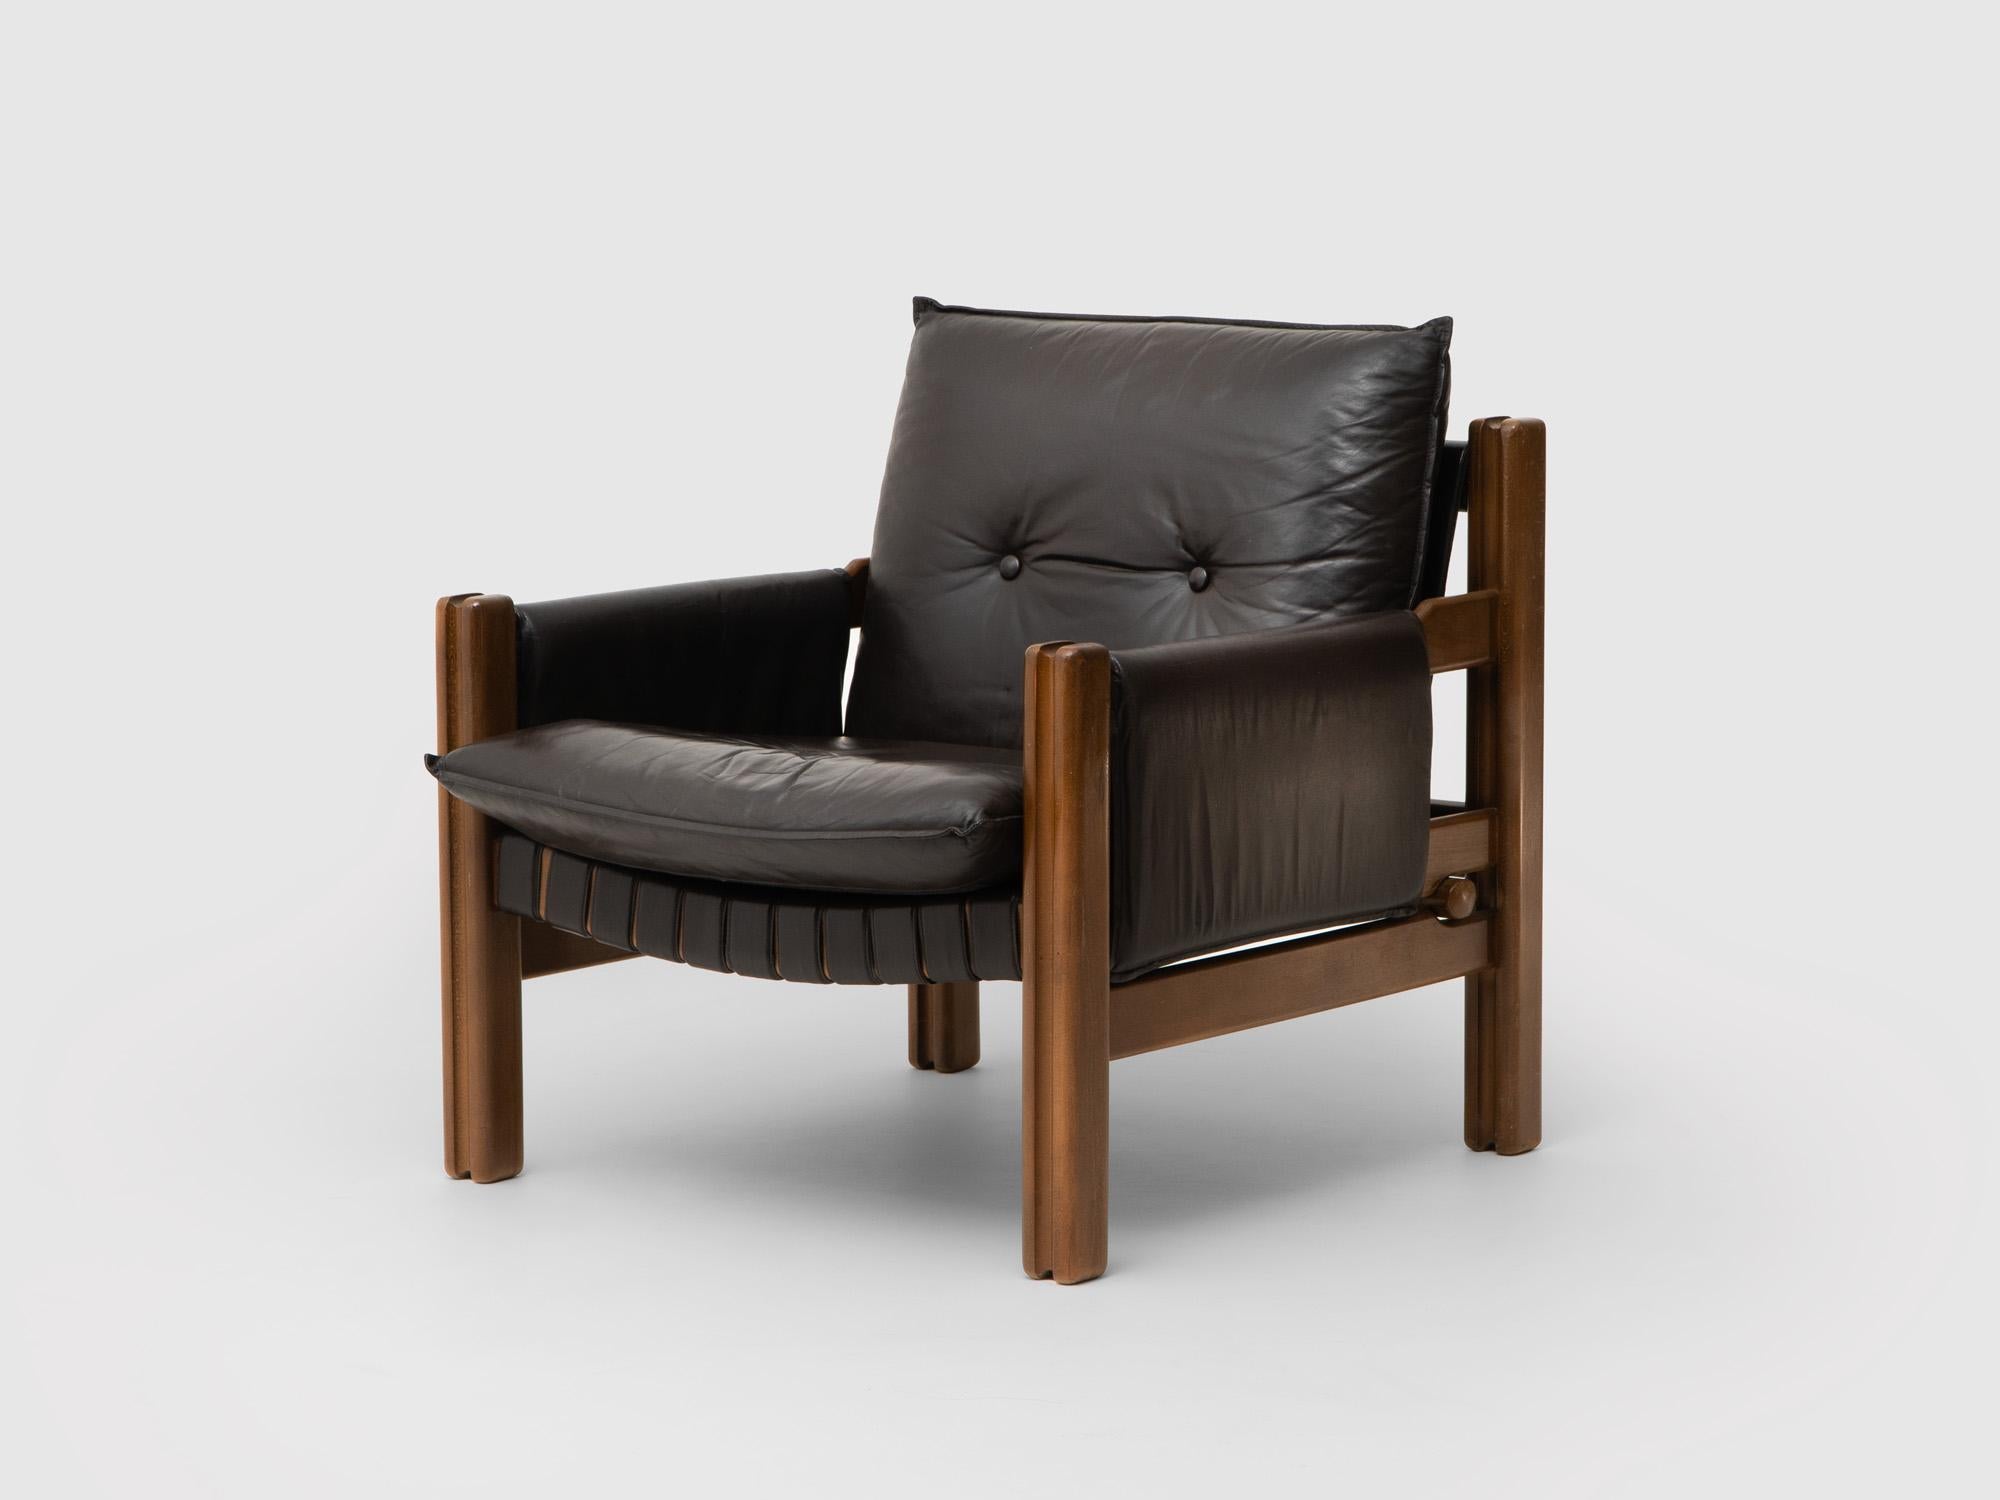 Leather and stained beechwood armchair by Ton, Czech Republic. Designer - Boris Hála. The couch was designed in 1984 as a part of series of luxury furniture in set called Eduard. The set was awarded with the best product of the year in 1984.